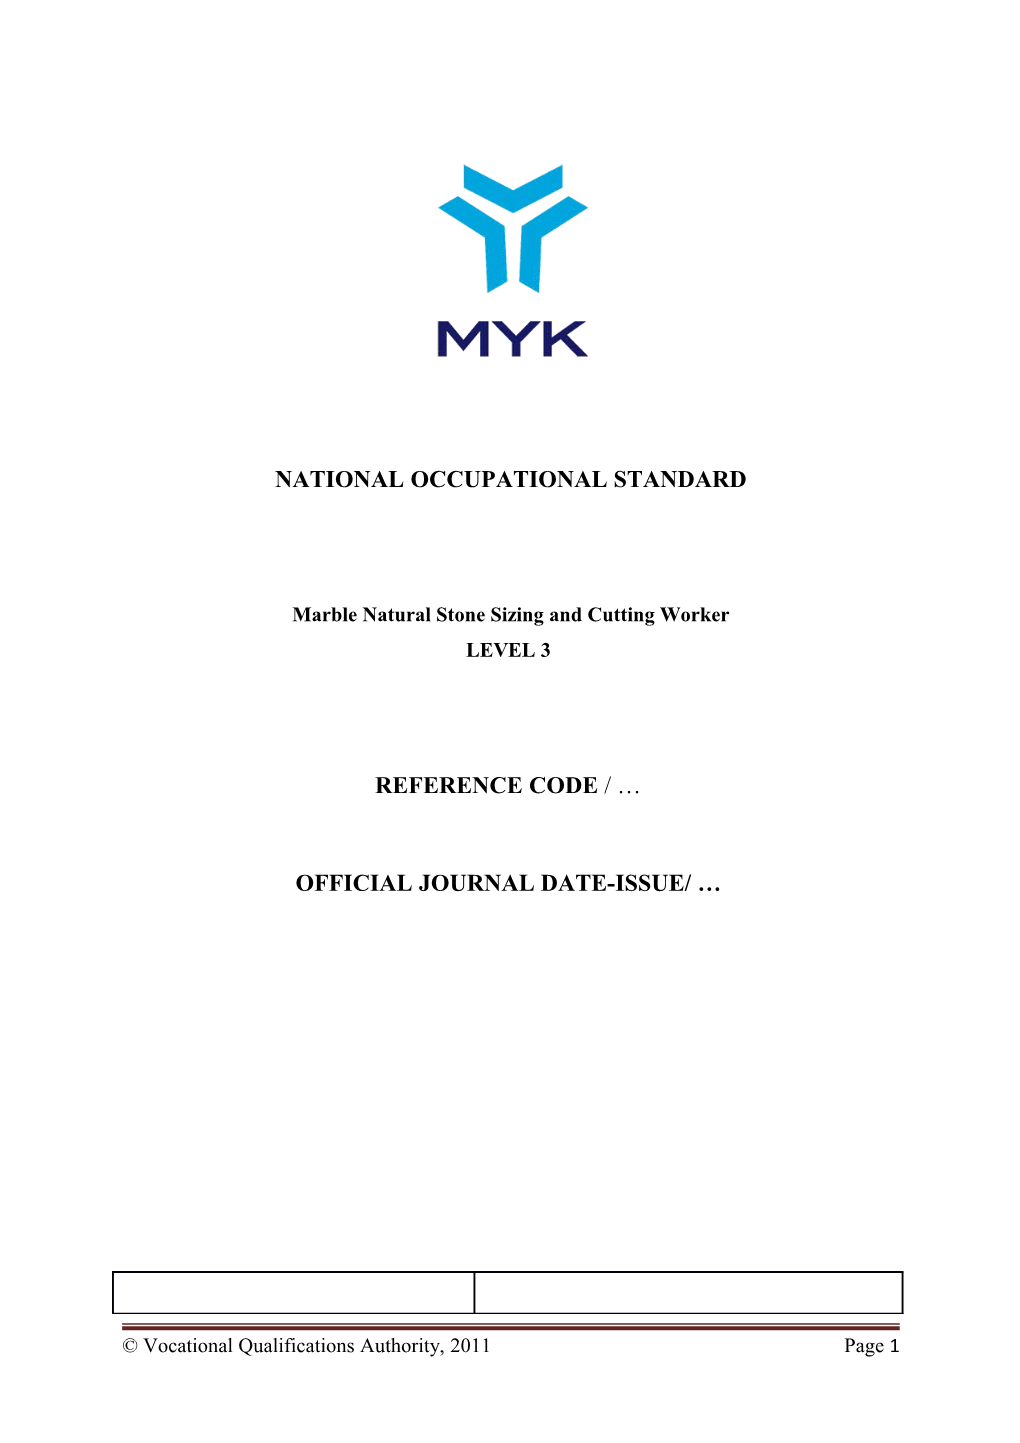 National Occupational Standard Reference Code/Verfication Date/ Rev. No